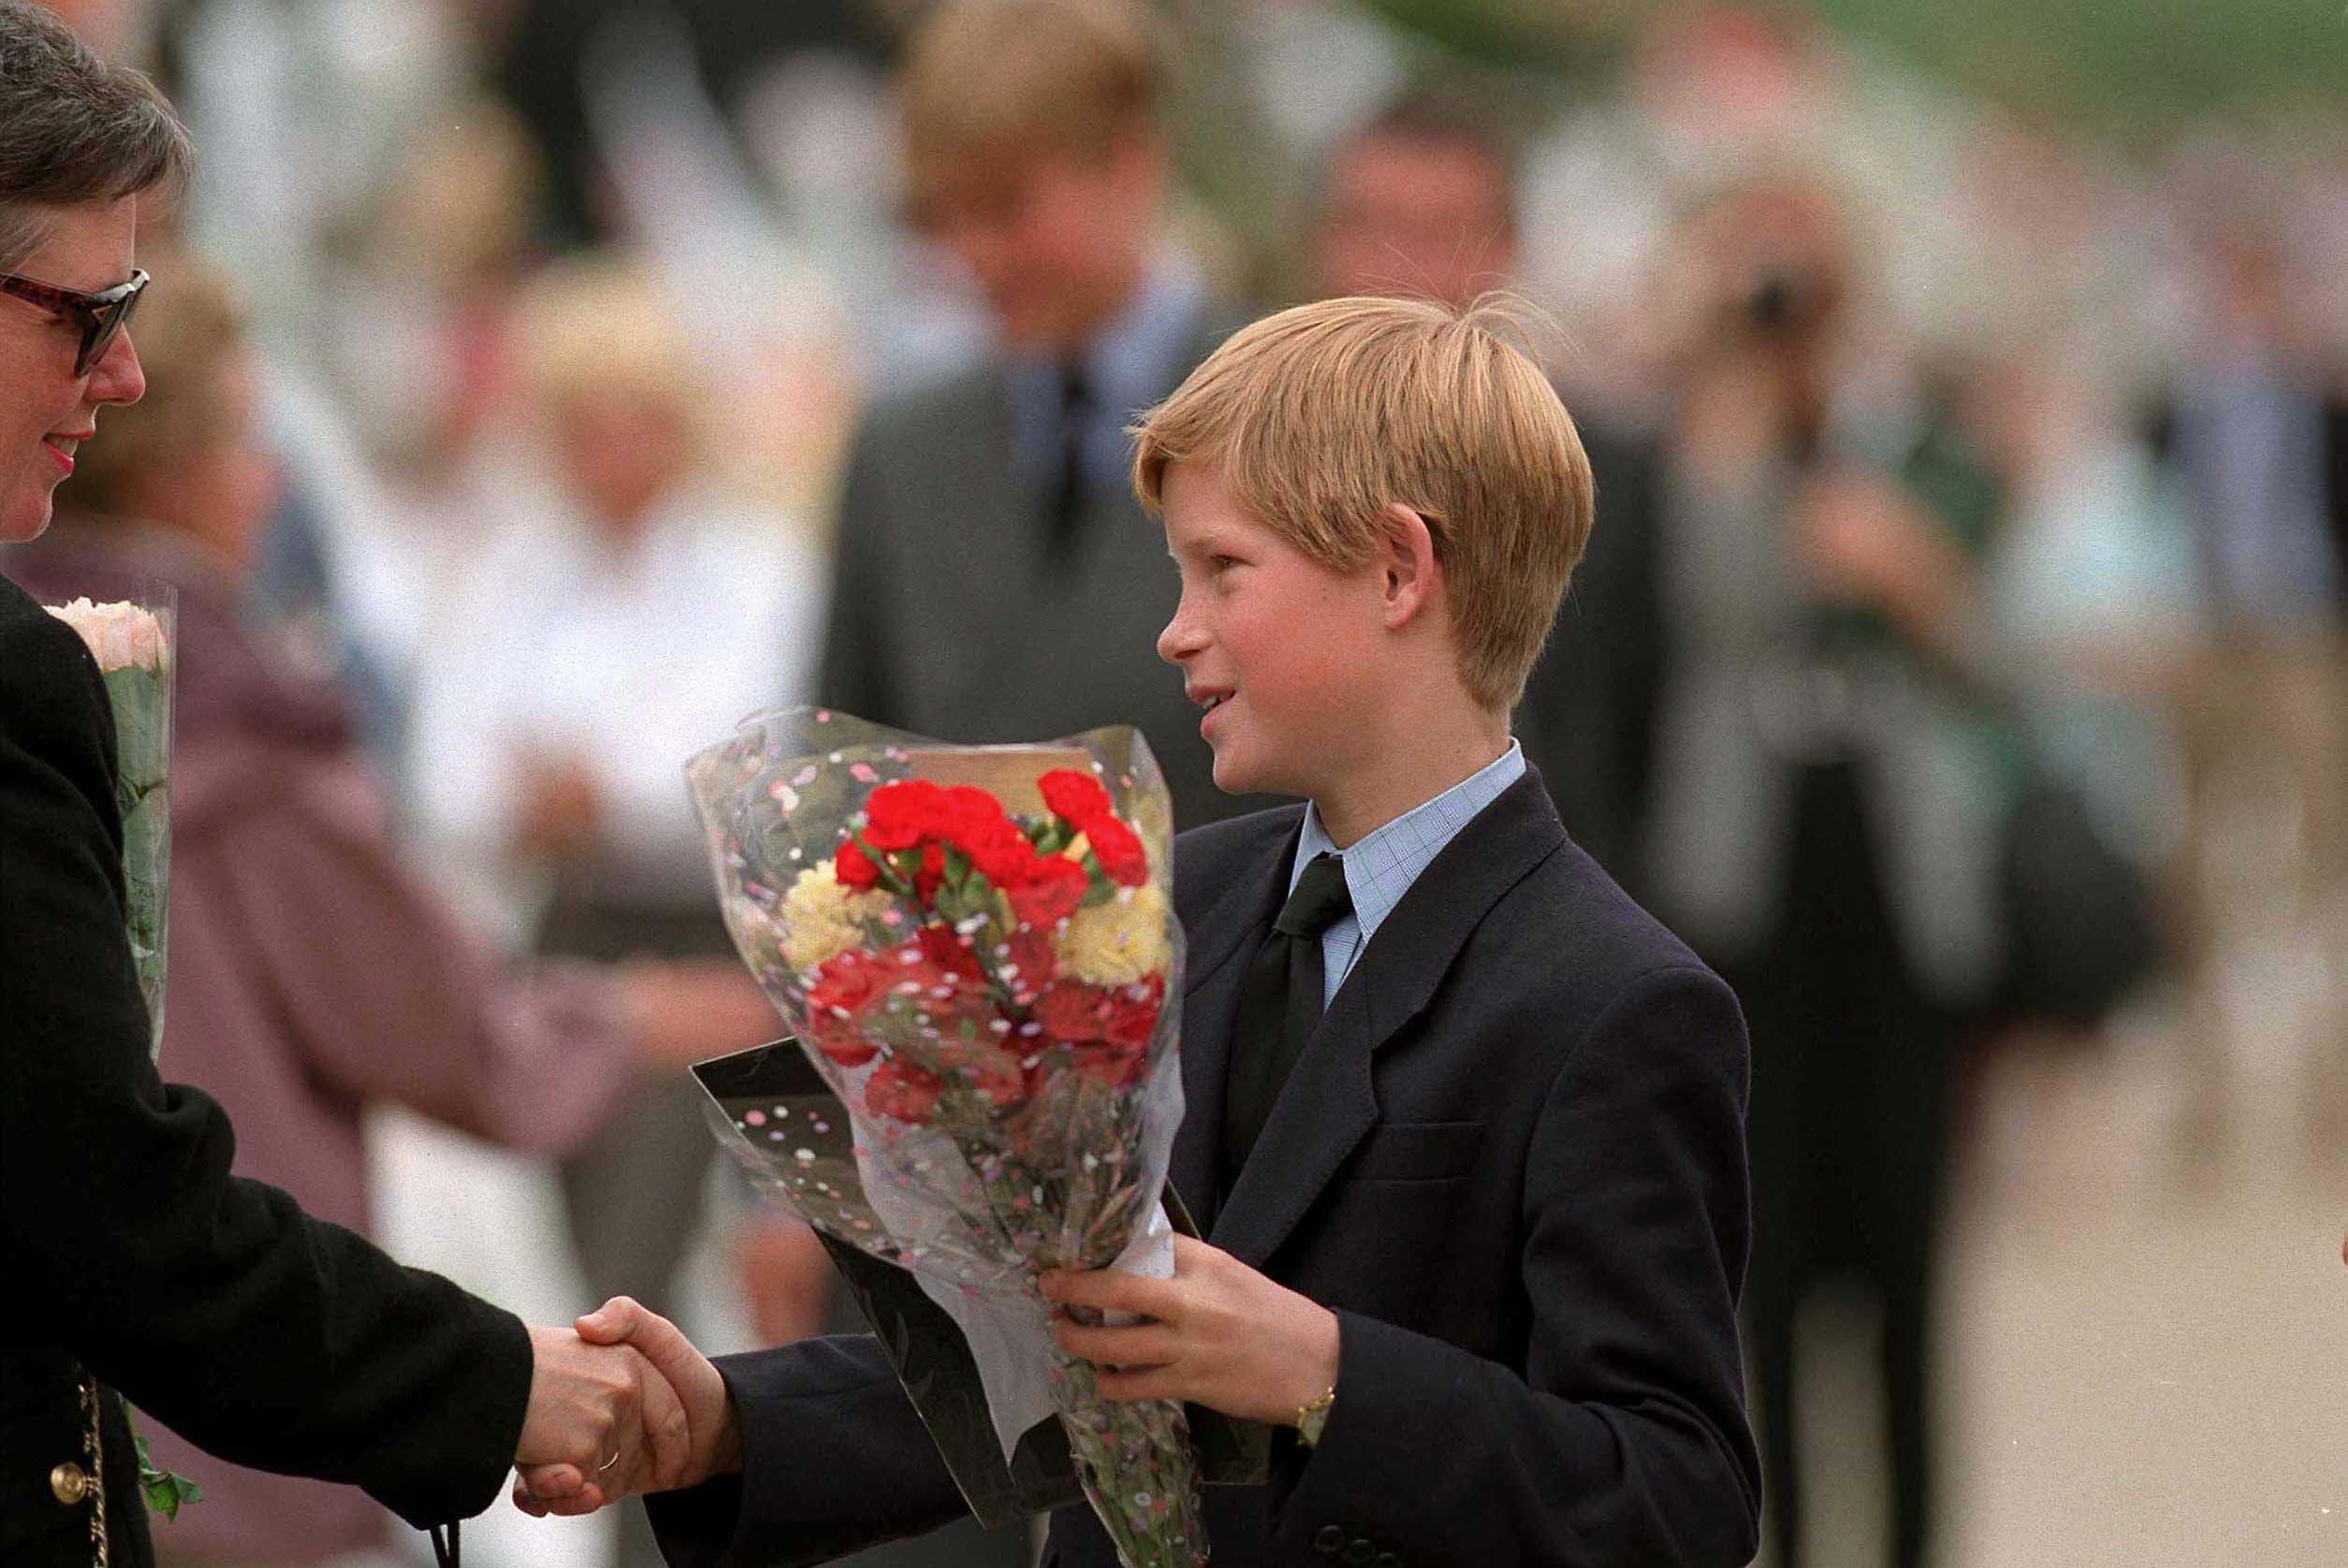 PRINCE CHARLES, PRINCE WILLIAM AND PRINCE HARRY VIEWING FLORAL TRIBUTES AFTER DEATH OF PRINCESS DIANA